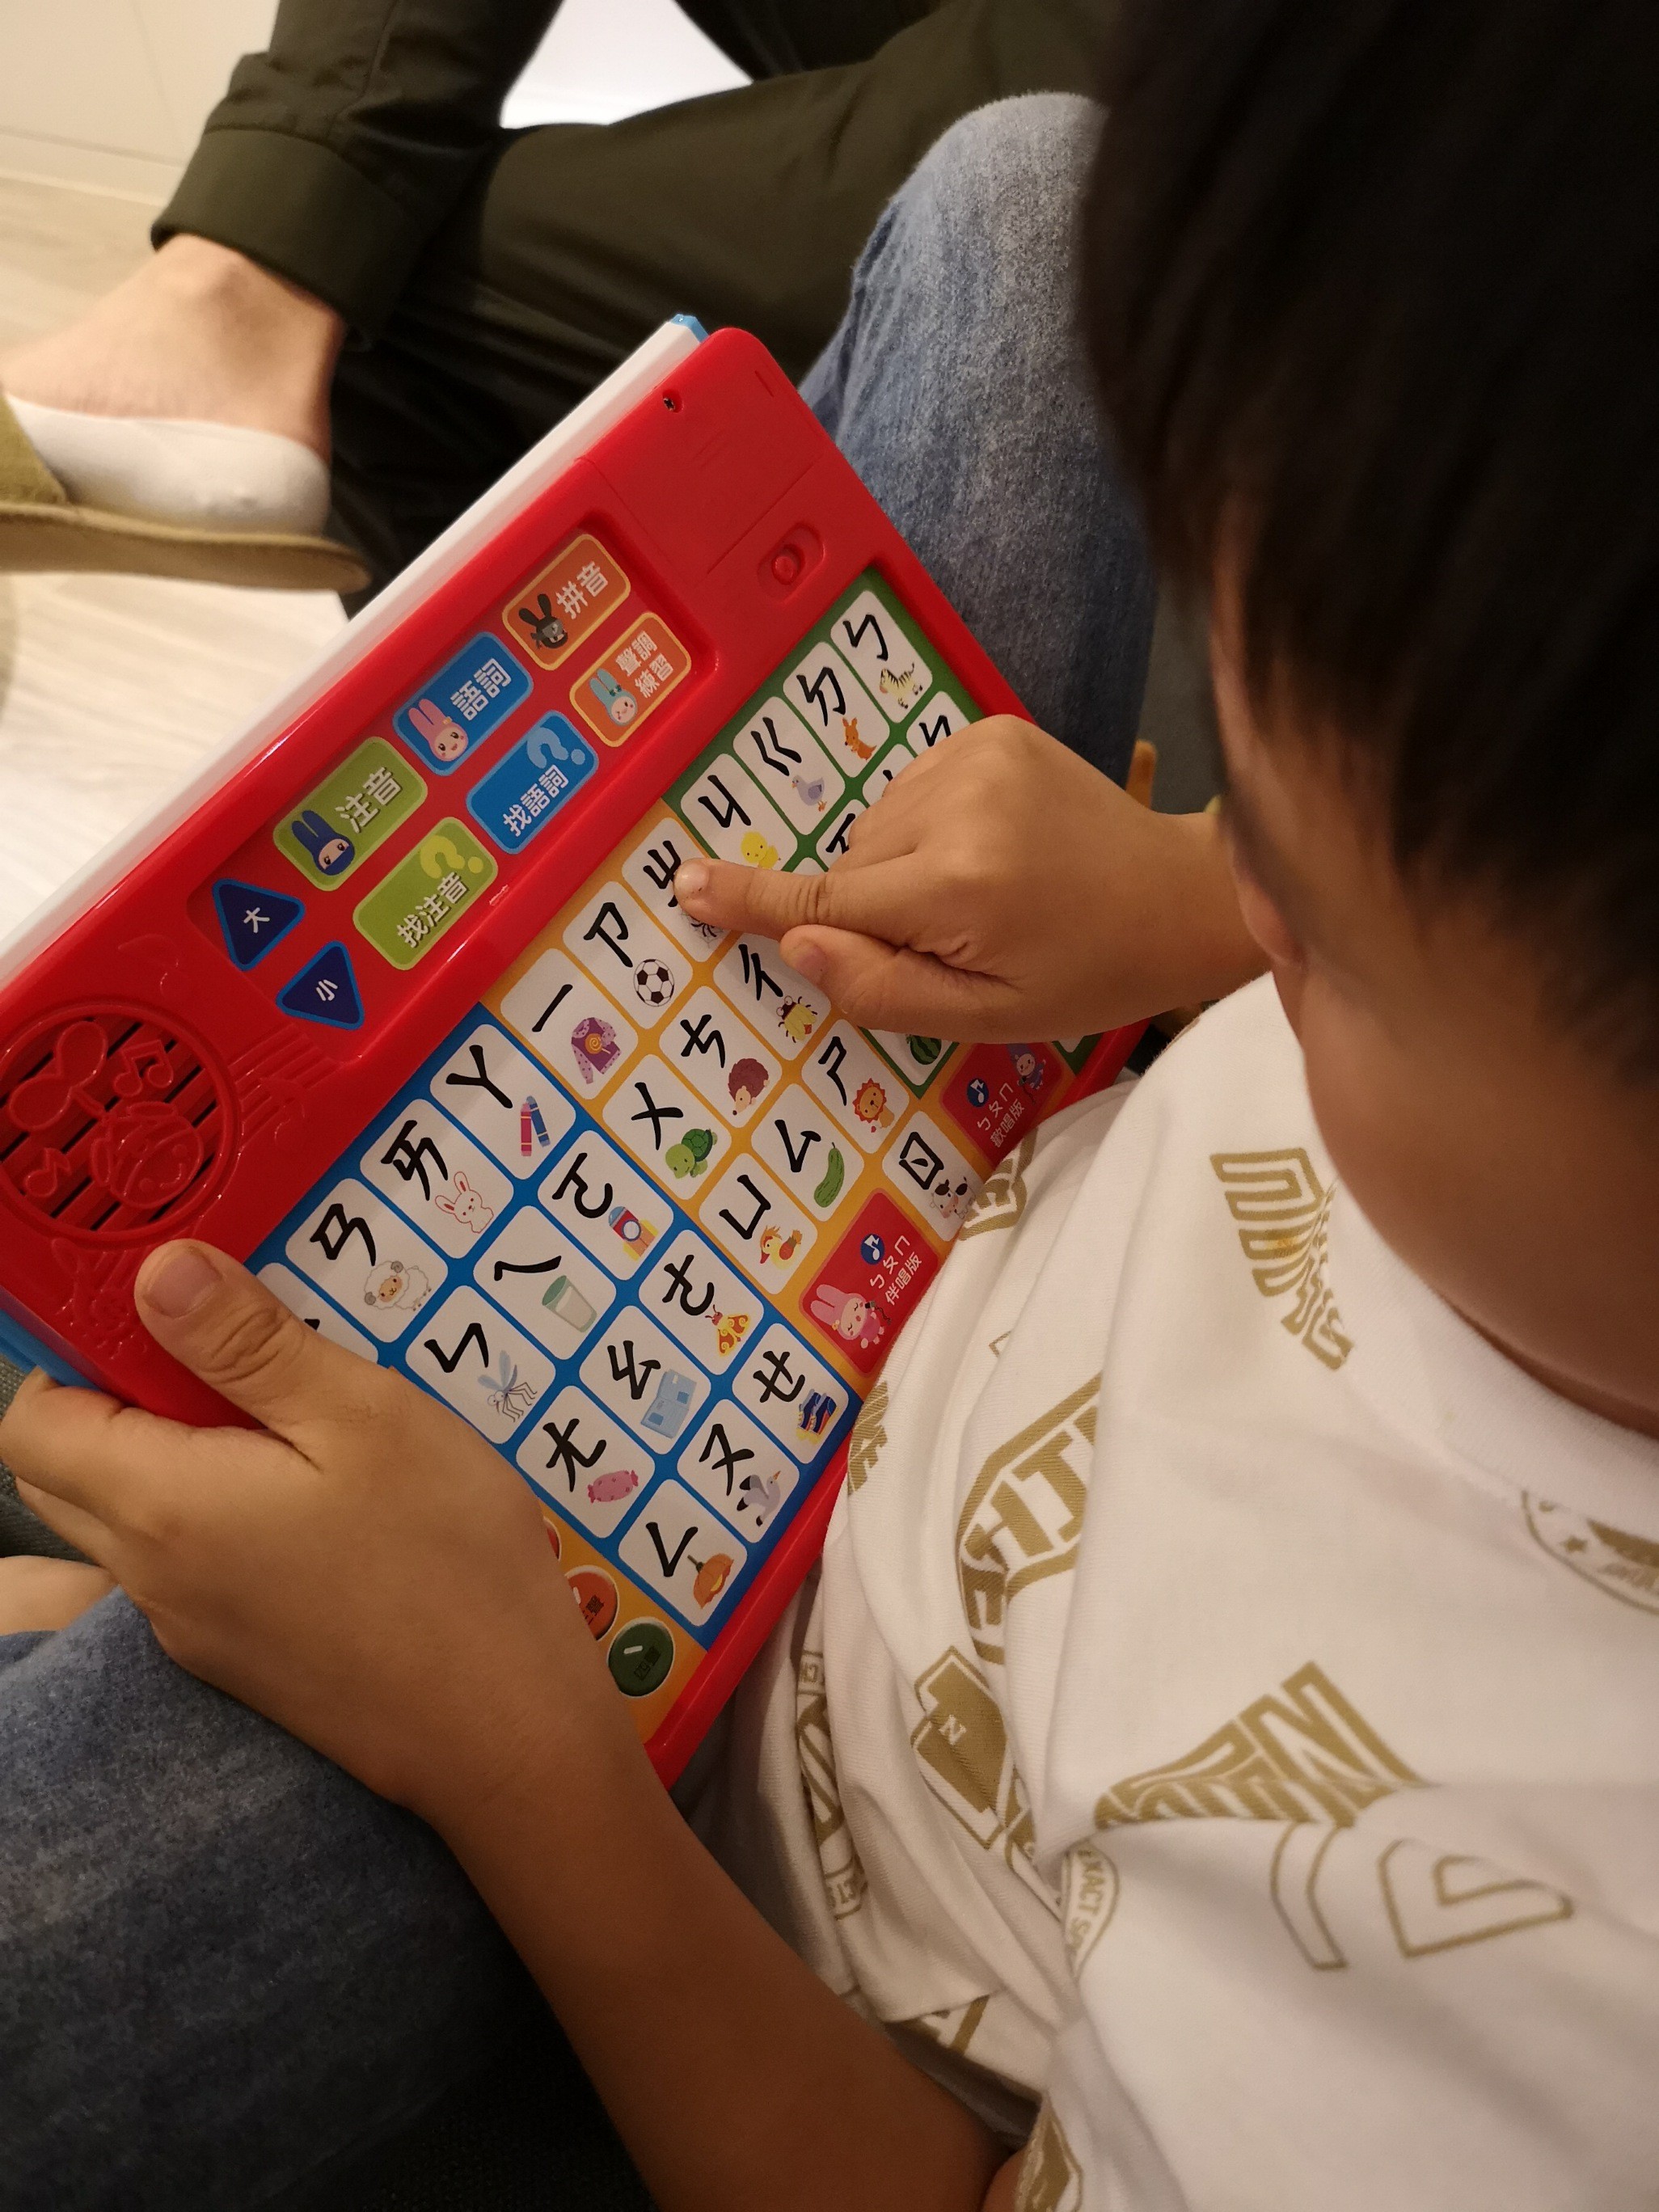 Zhuyin is particularly useful for children who learn Mandarin as a second language.